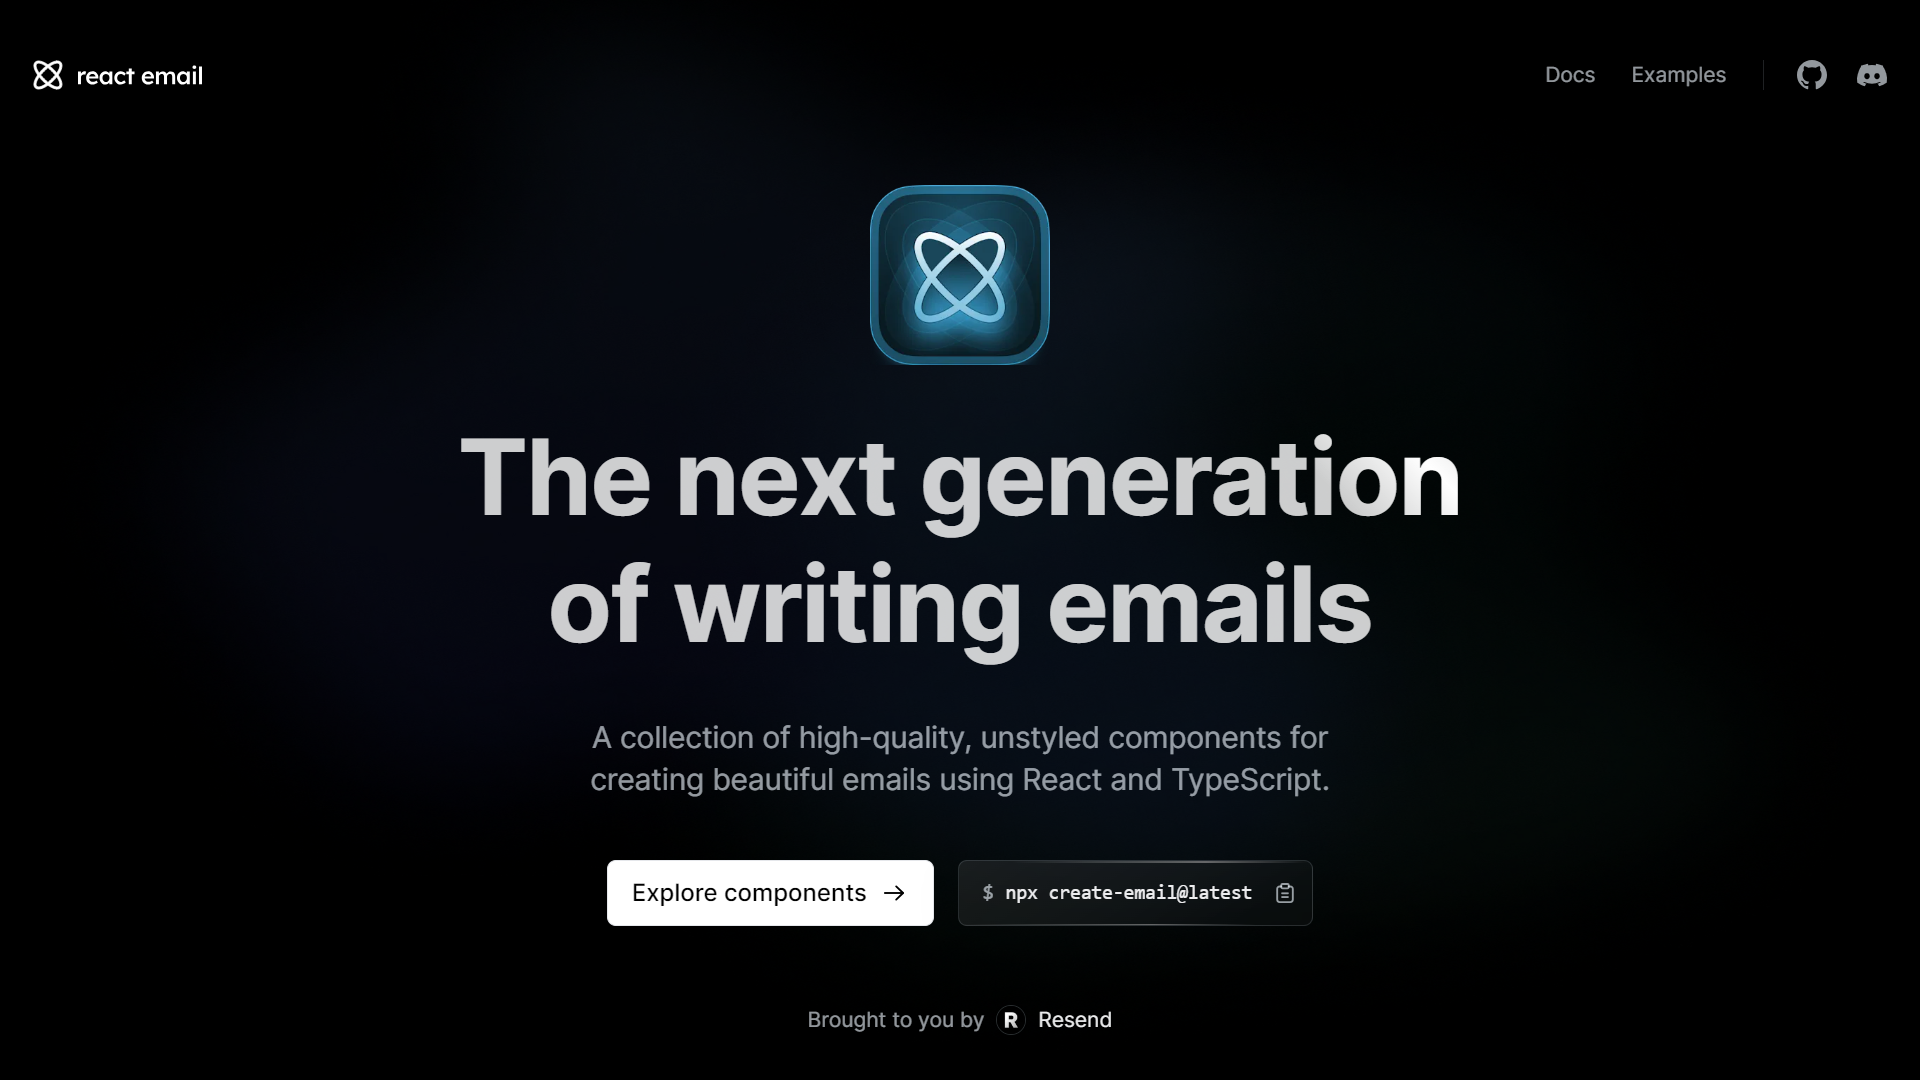 React Email homepage